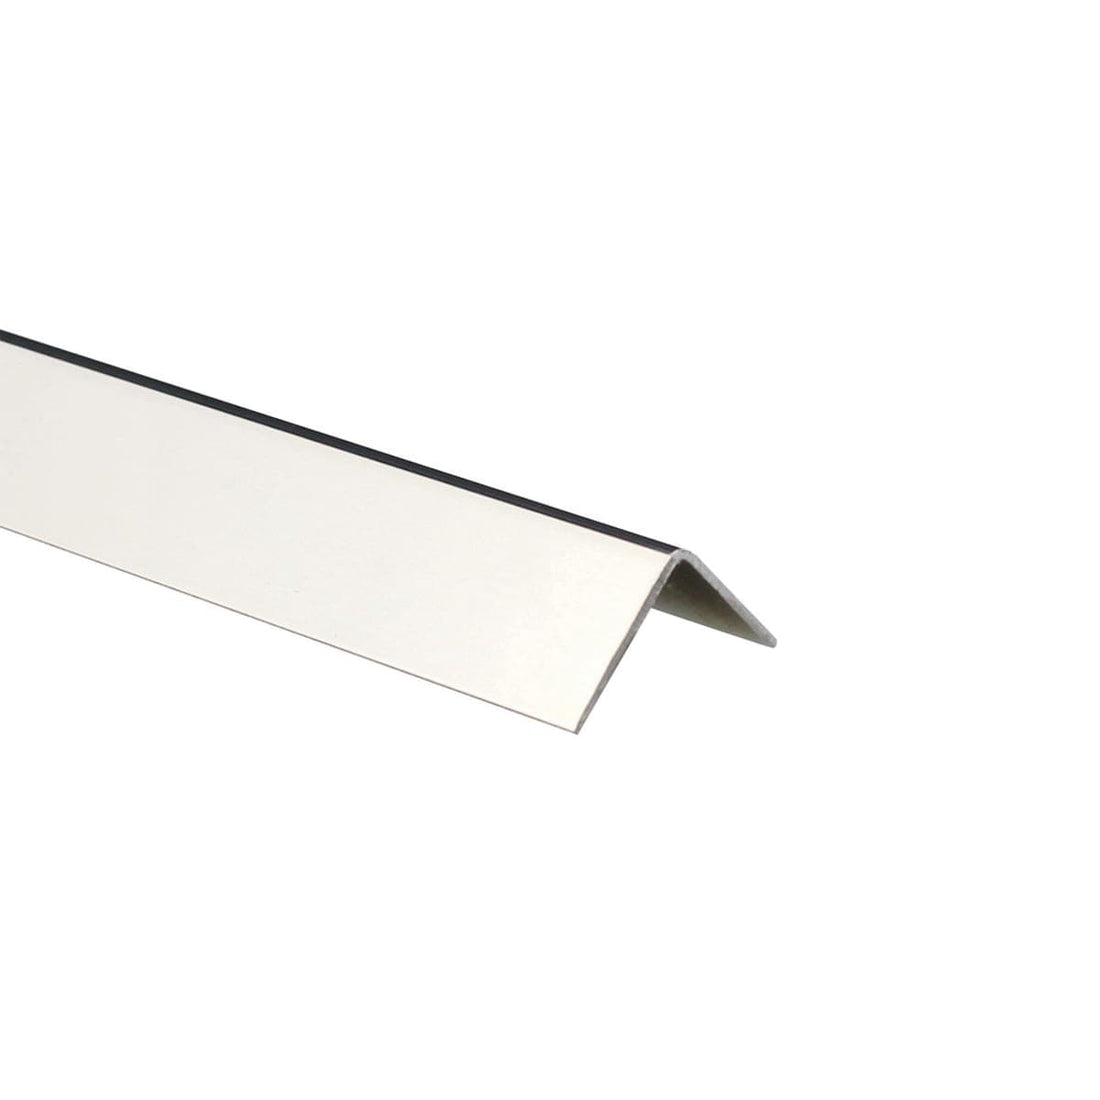 ANGLE PROFILE 40X40X0,5MM 2MT STAINLESS STEEL AISI 304 - best price from Maltashopper.com BR410003802